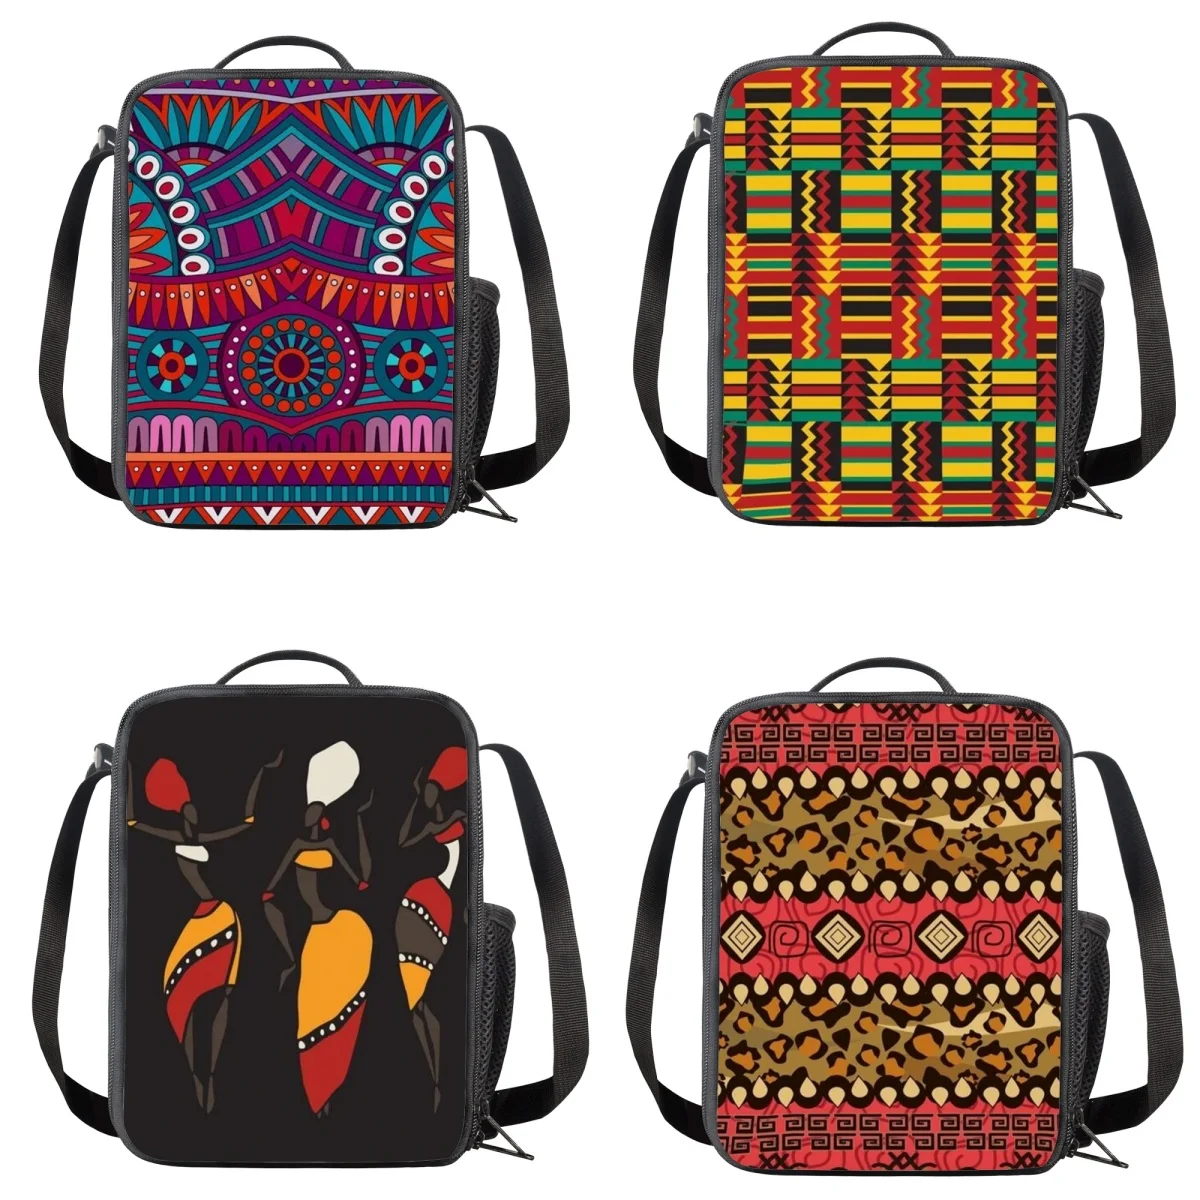 BELIDOME African Culture Design Lunch Bag for School Insulated Portable Kids Lunchbox Durable Preschool Childen Cooler Bags